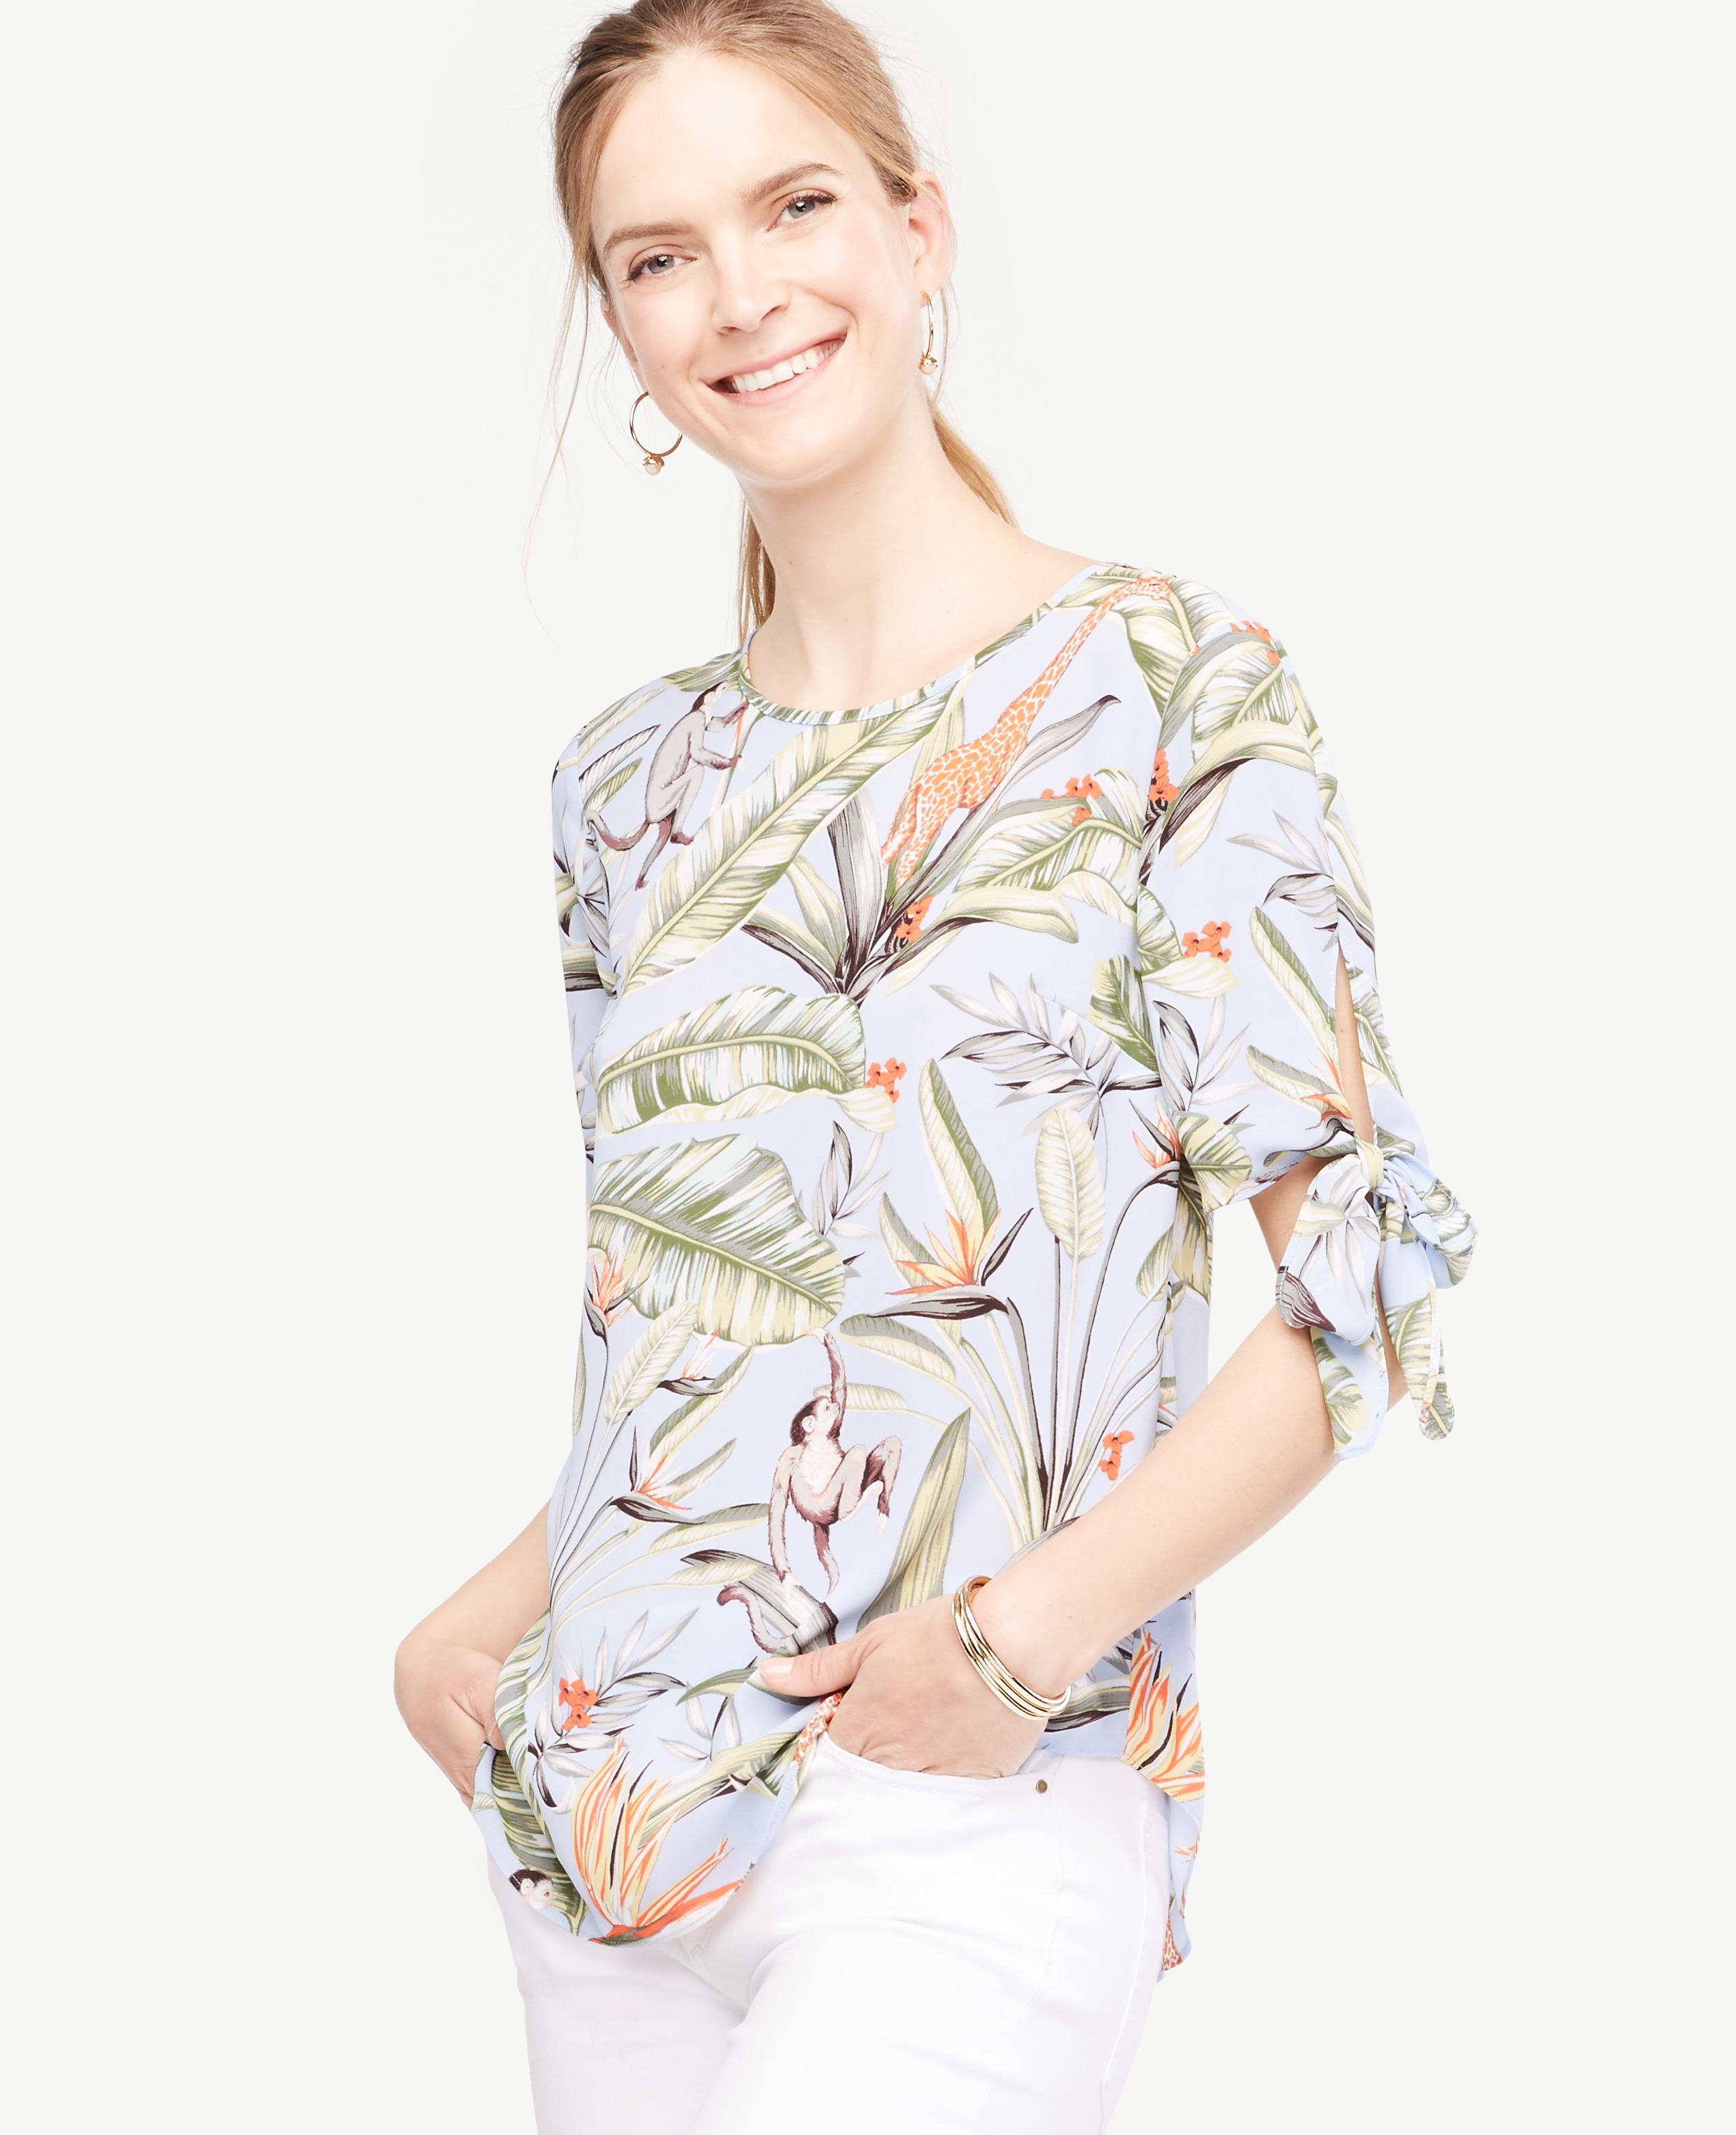 Lyst - Ann taylor Tropical Tie Sleeve Blouse in Blue